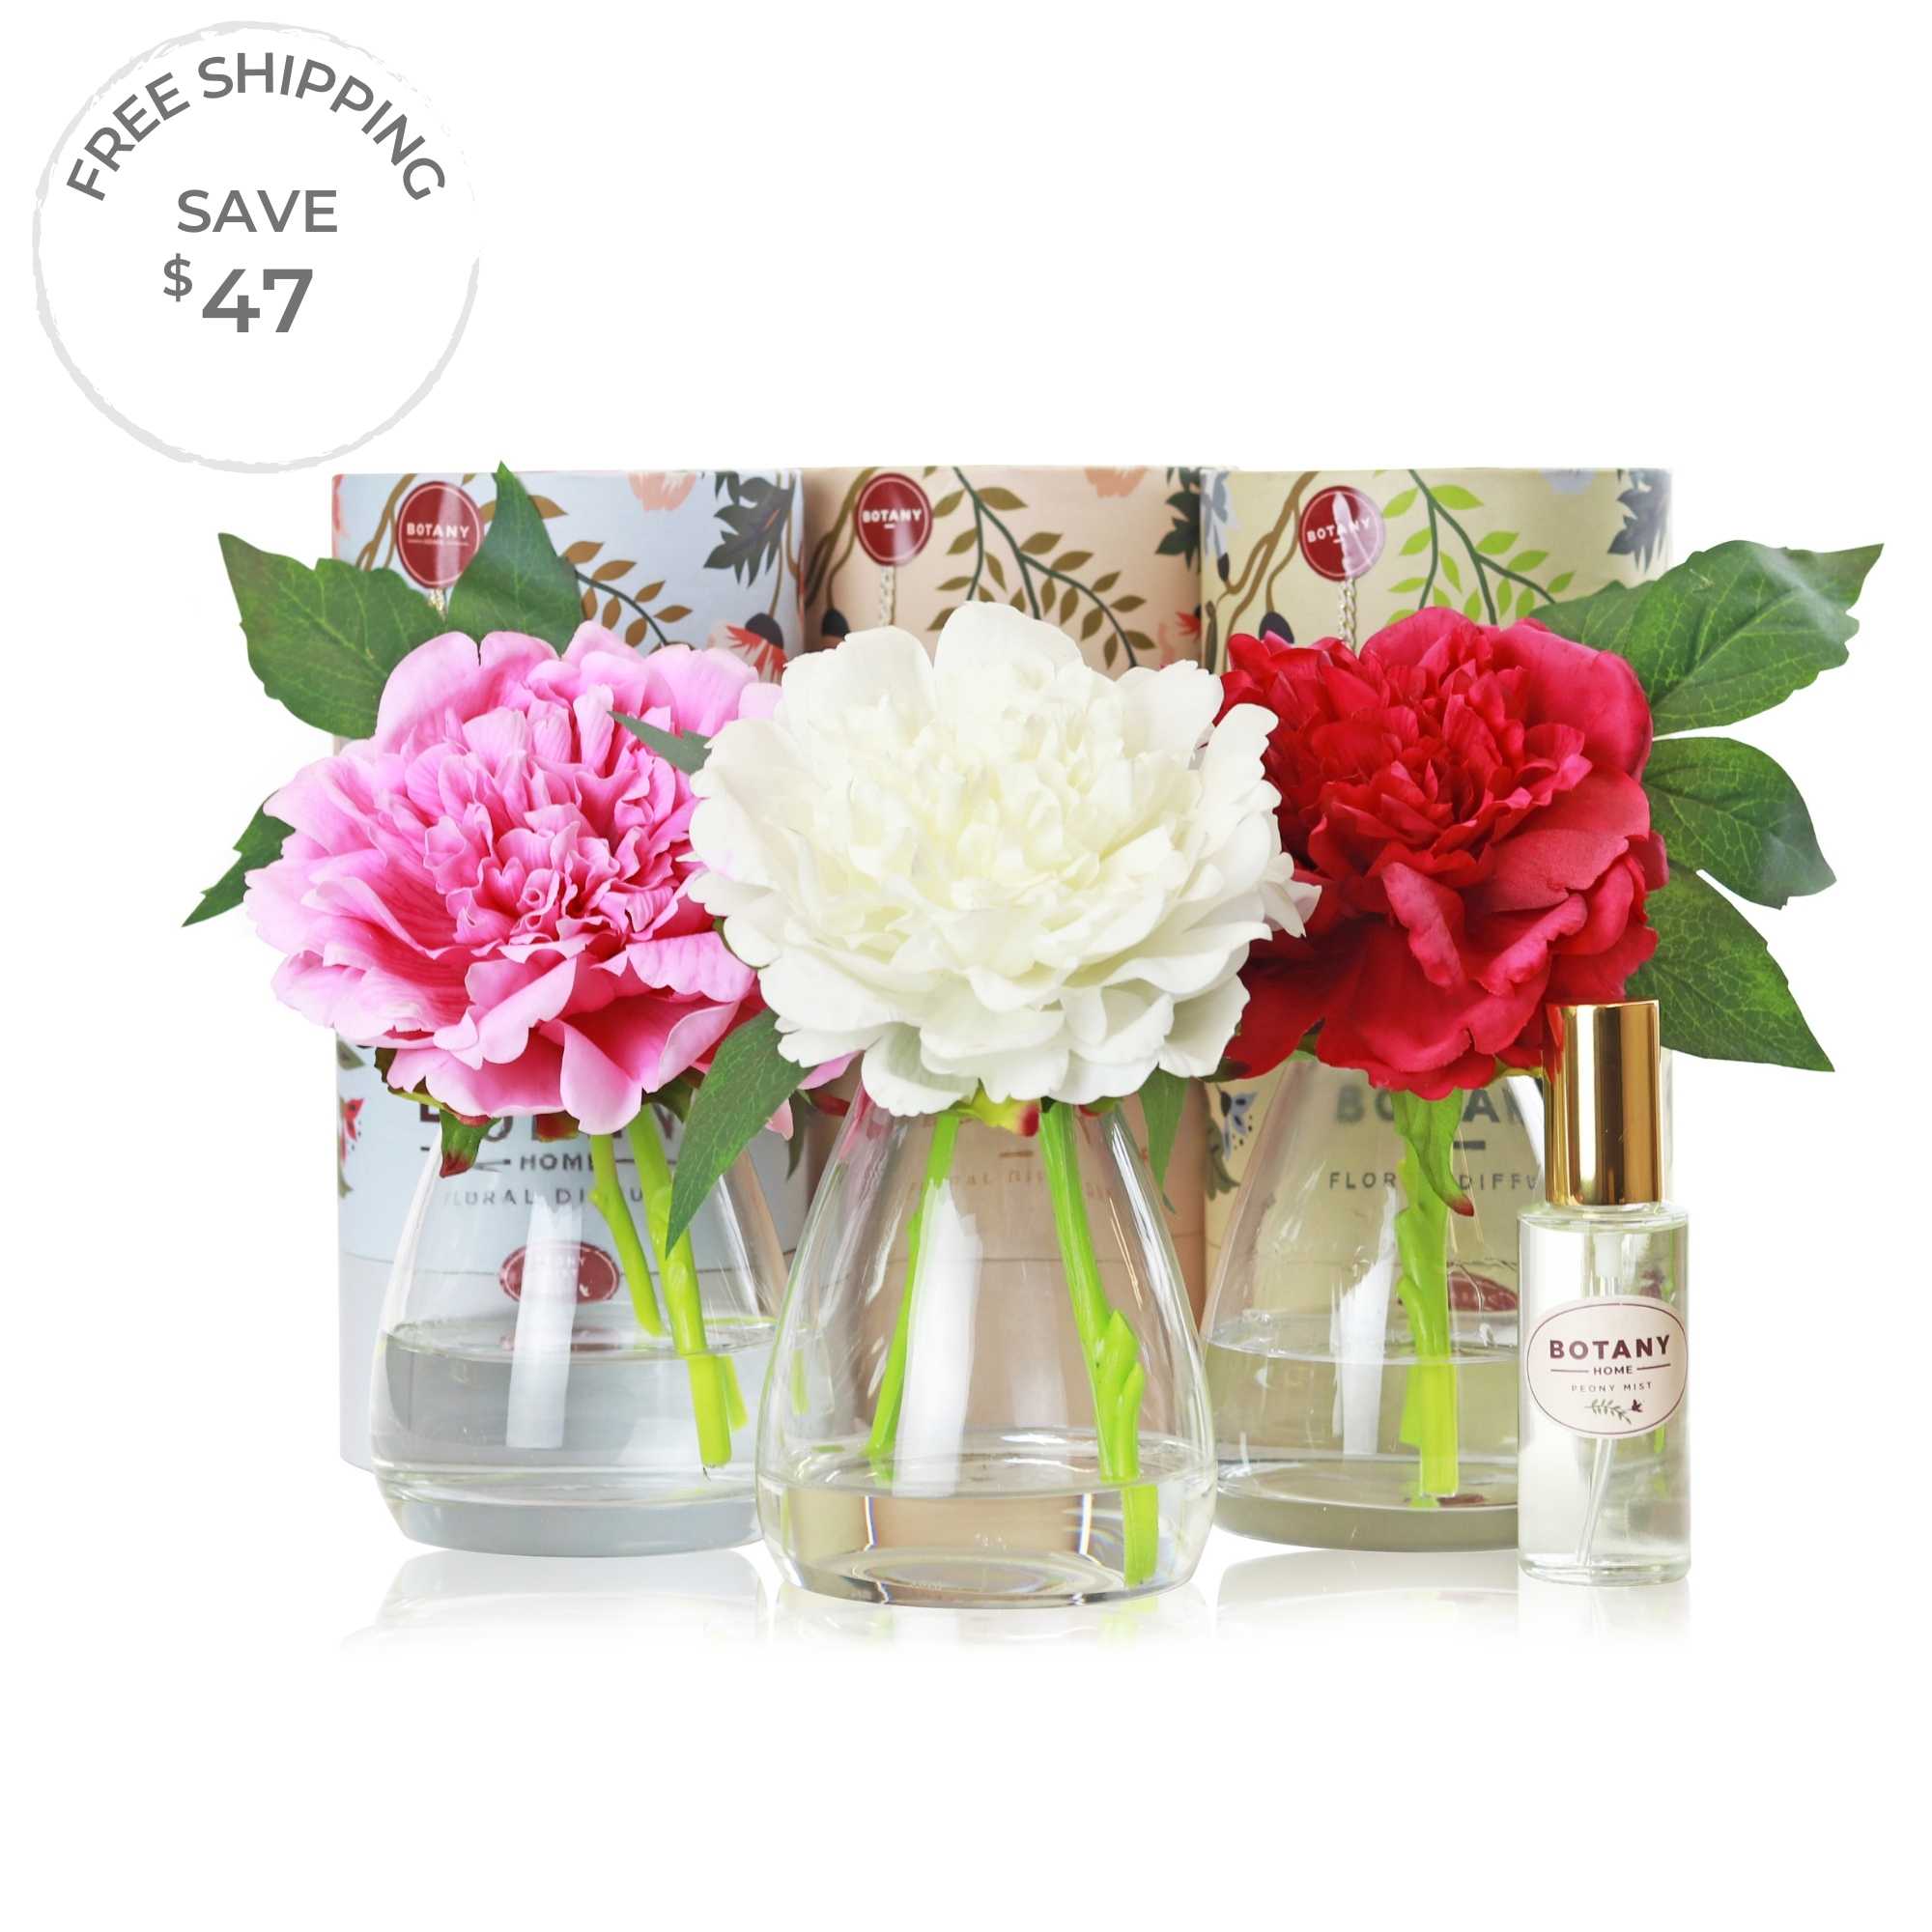 A set of 3 artificial Peony arrangements sold as a bundle paired with floral fragrances